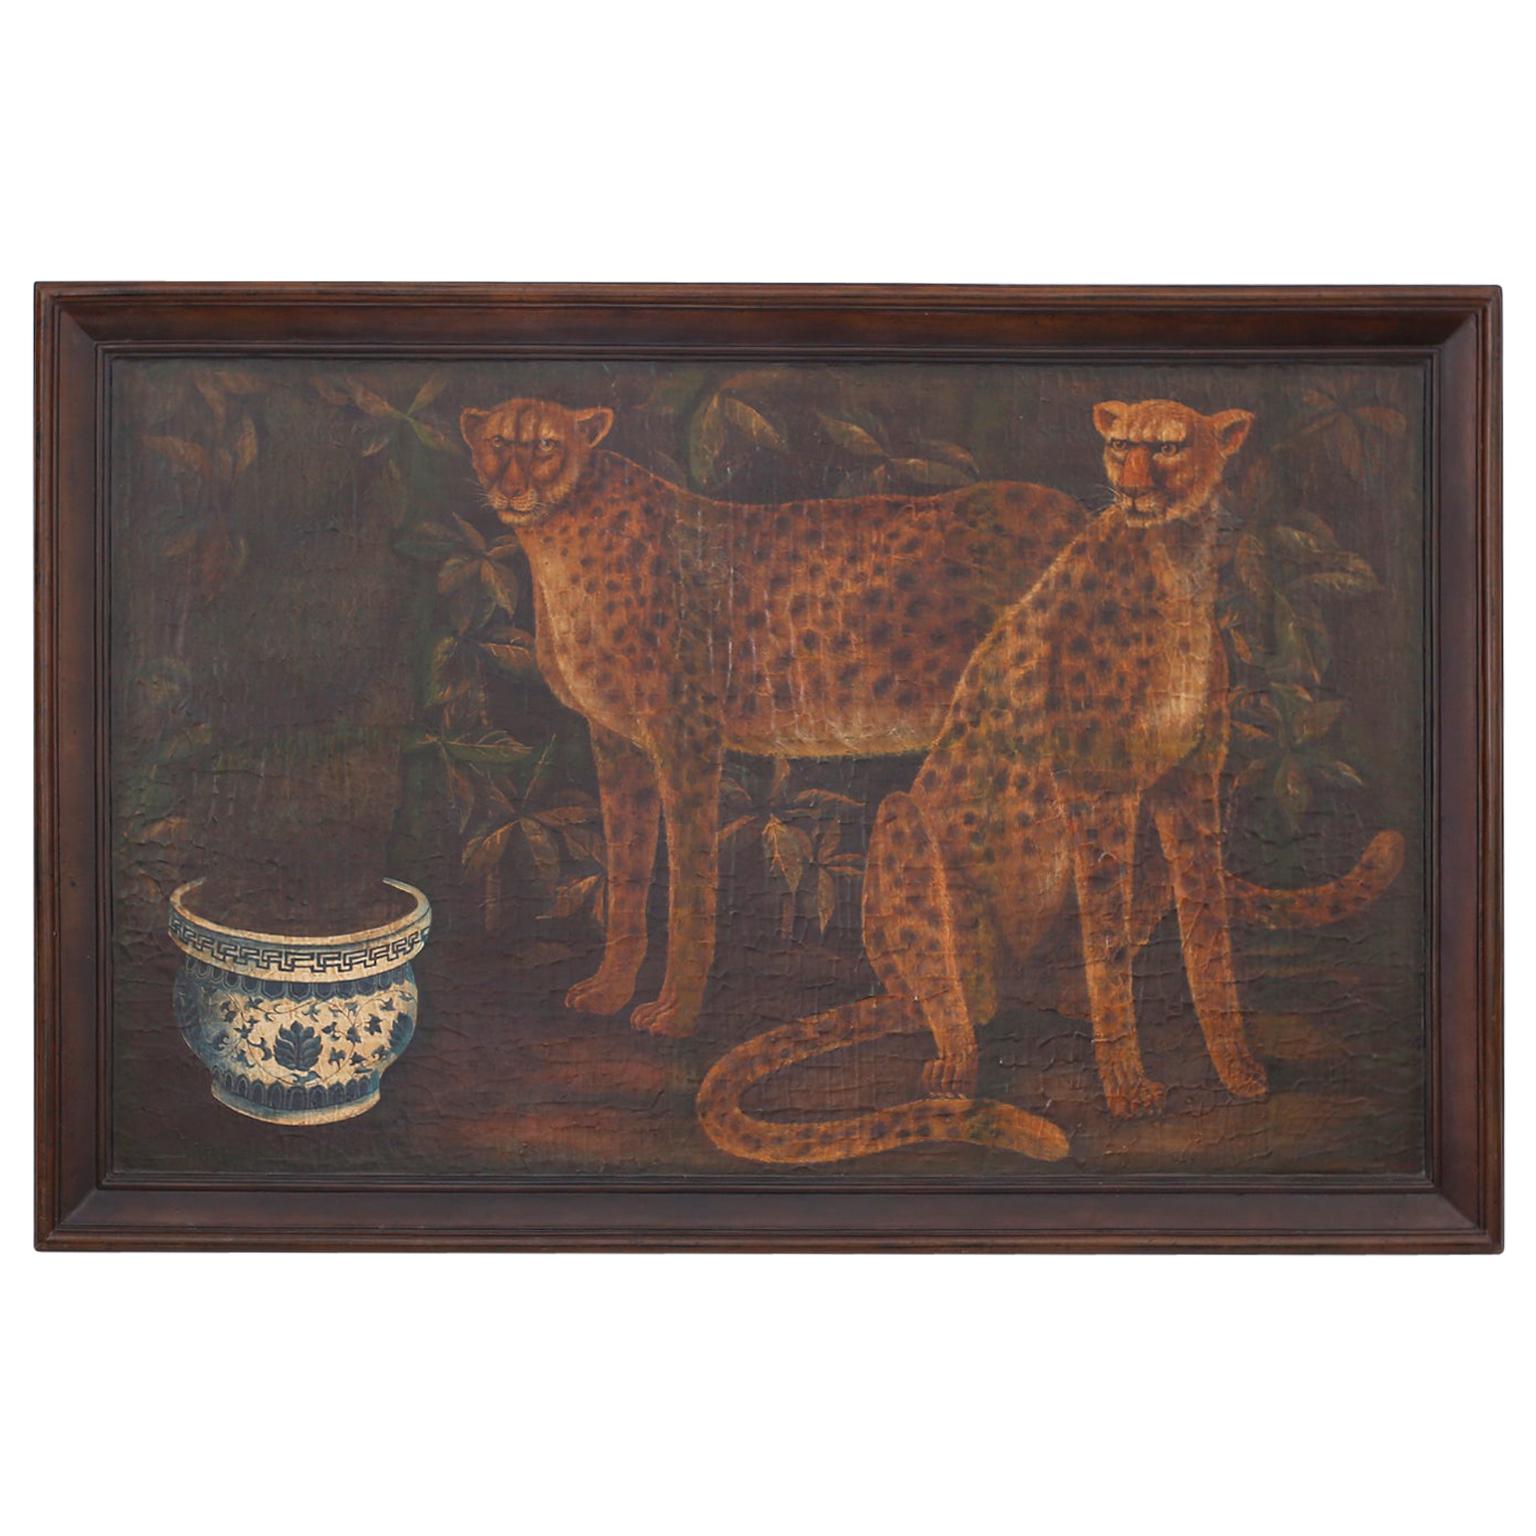 Large Framed Image of Two Cheetahs